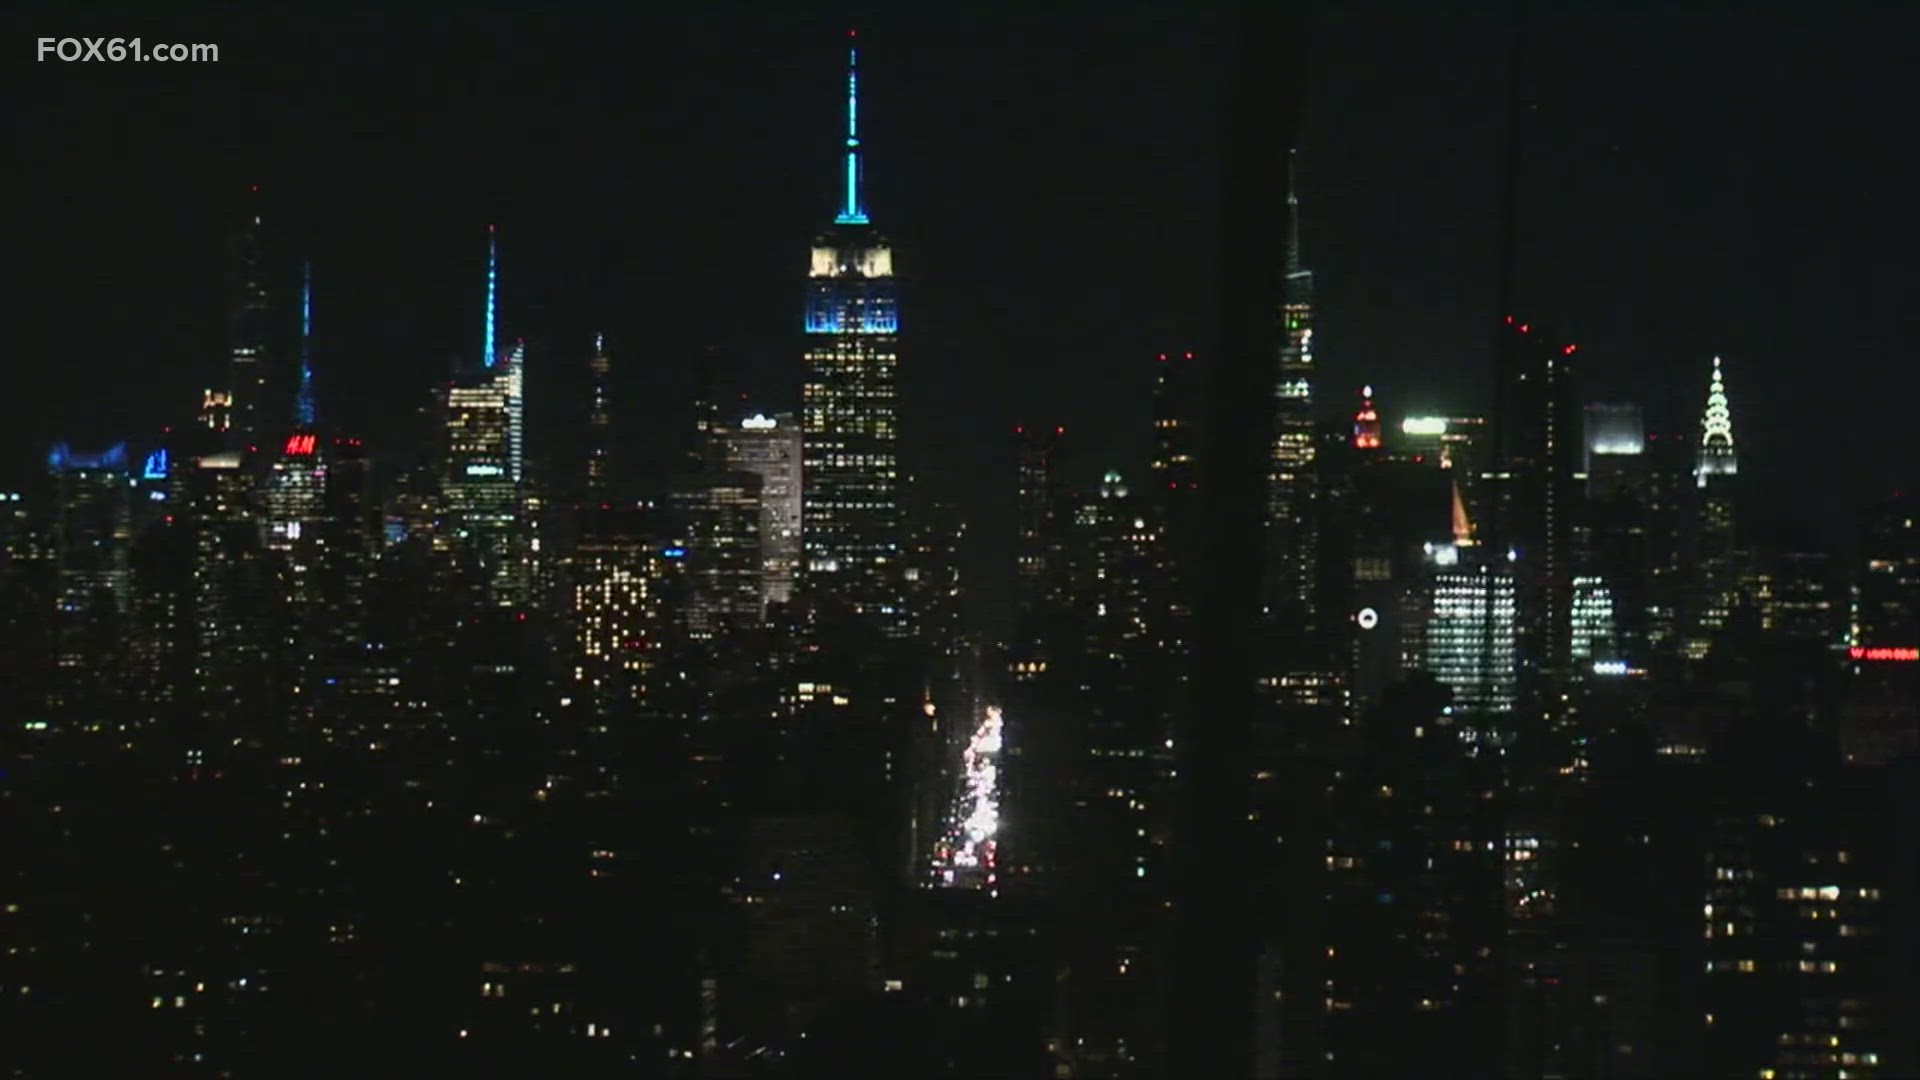 The Empire State Building changed its colors on Monday night to blue and white to honor the University of Connecticut’s NCAA National Championship win over San Diego